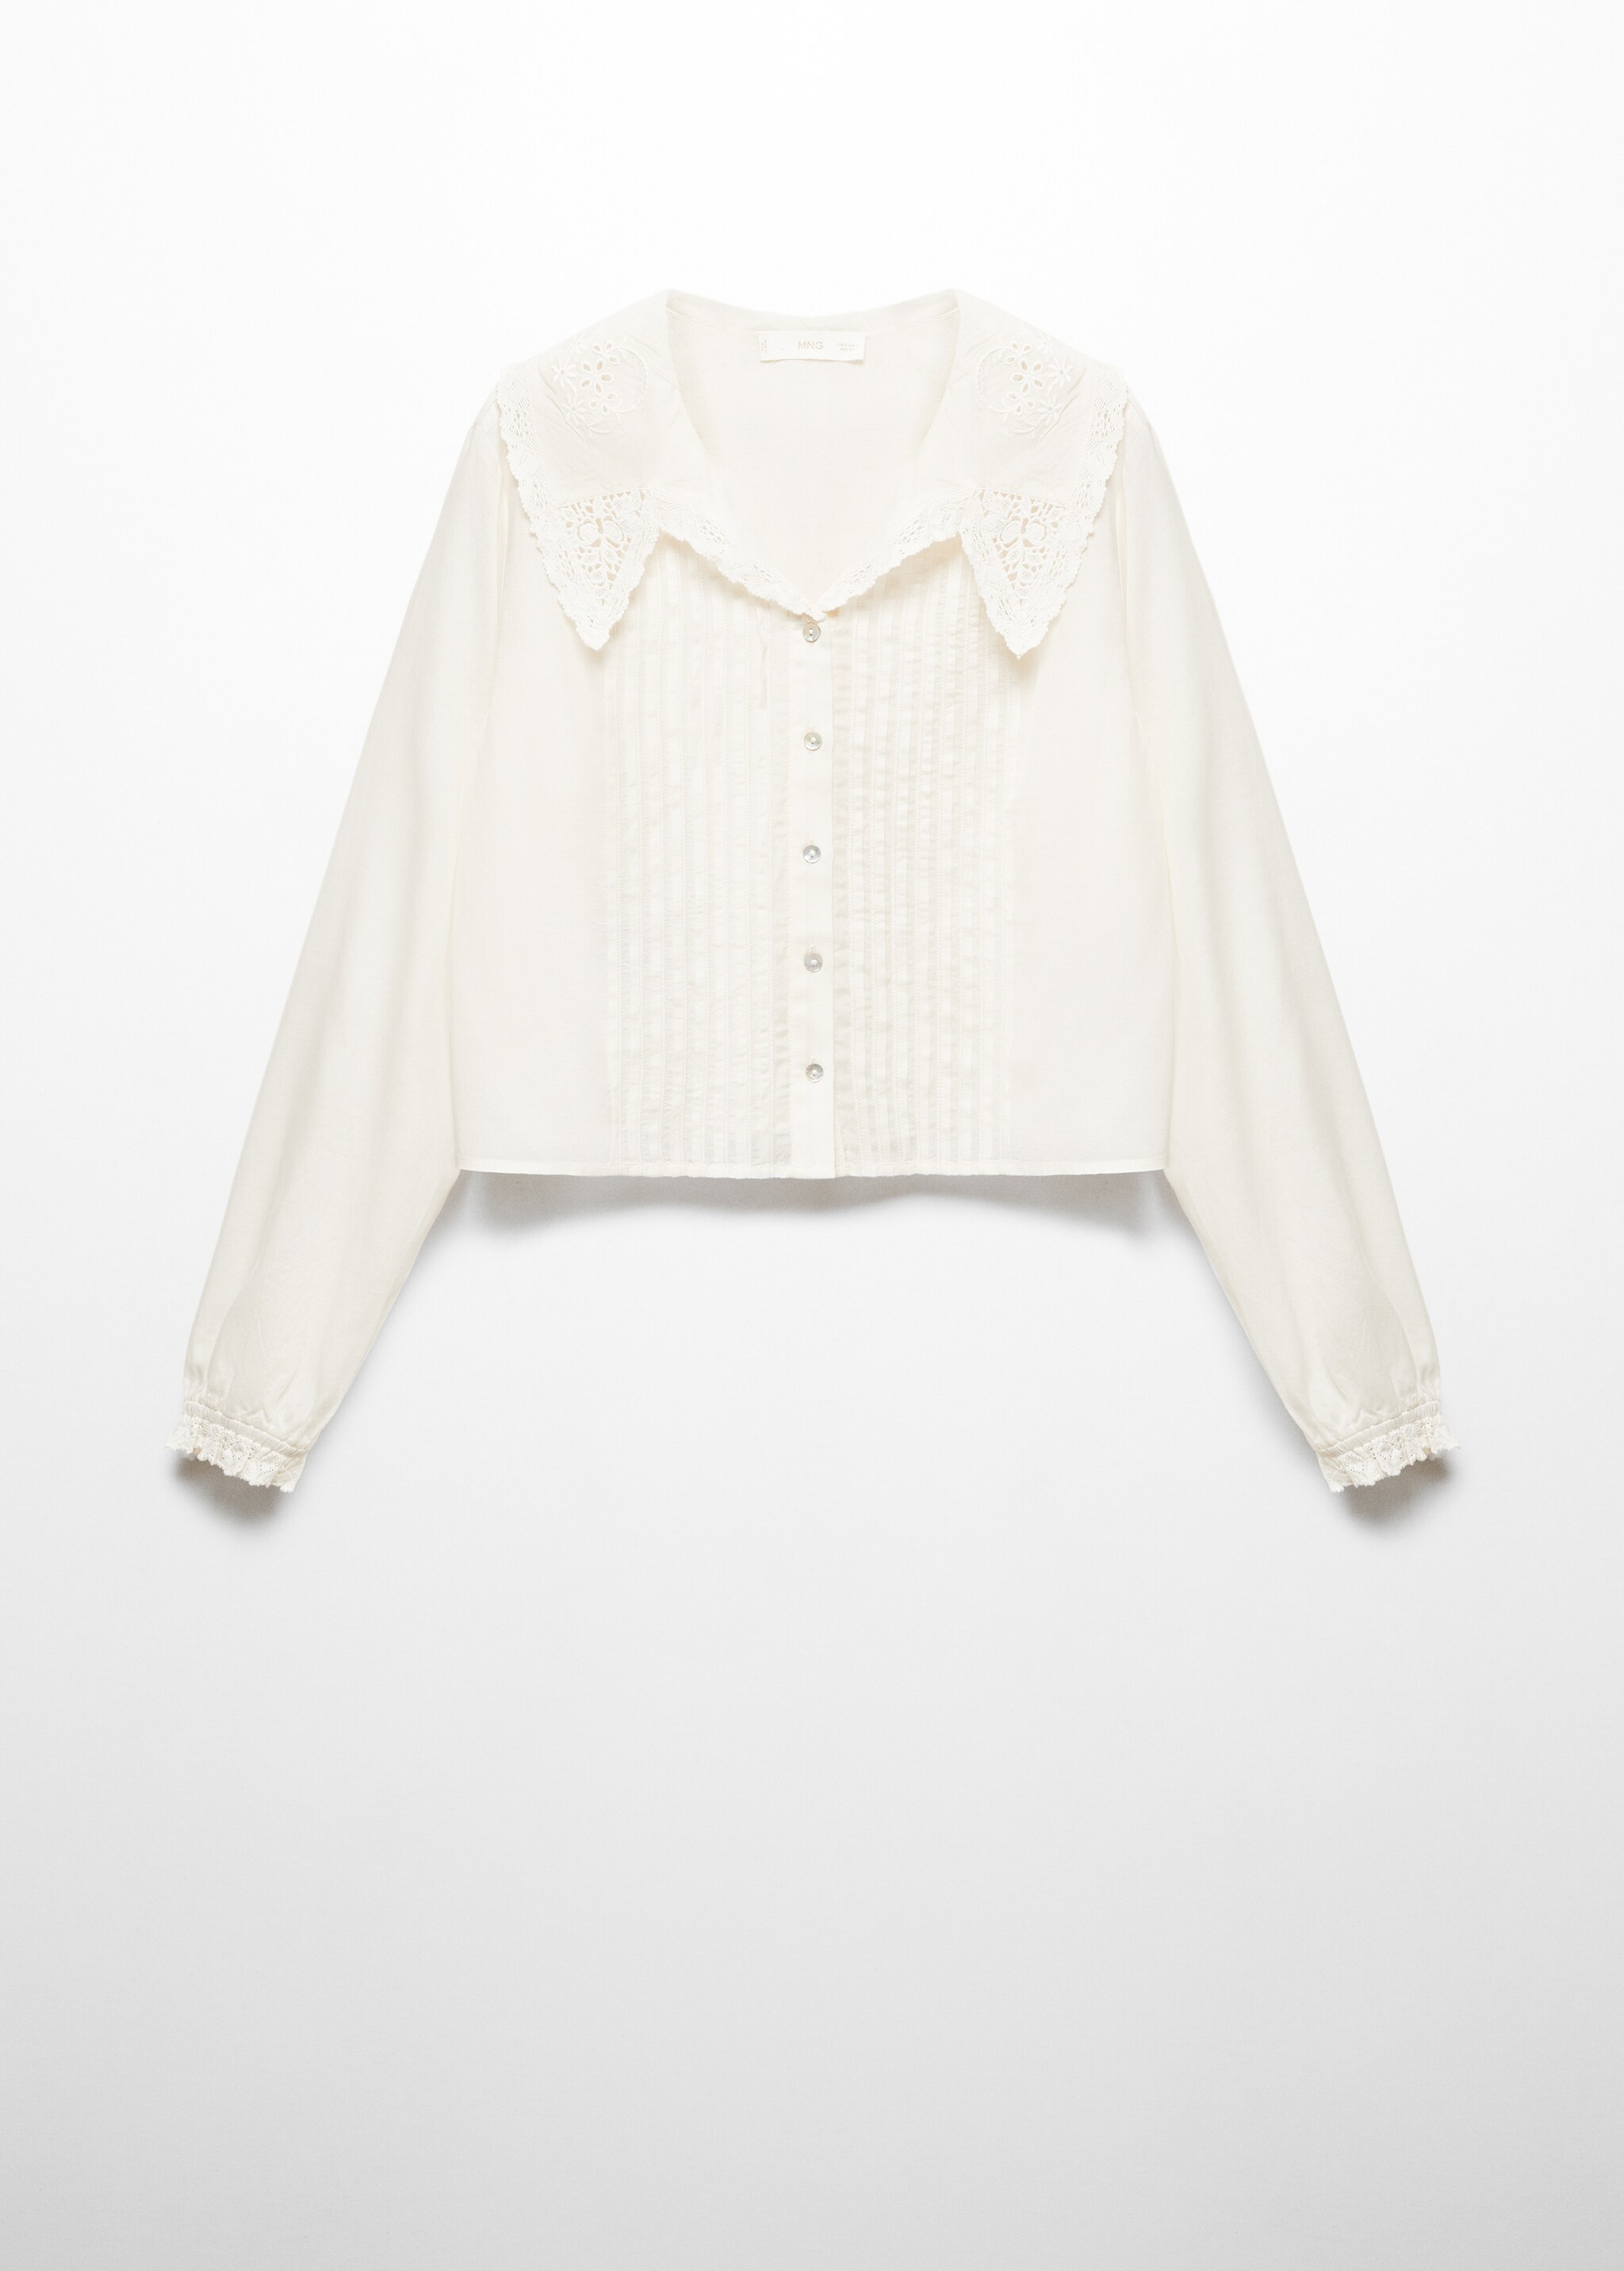 Openwork shirt with collar - Article without model